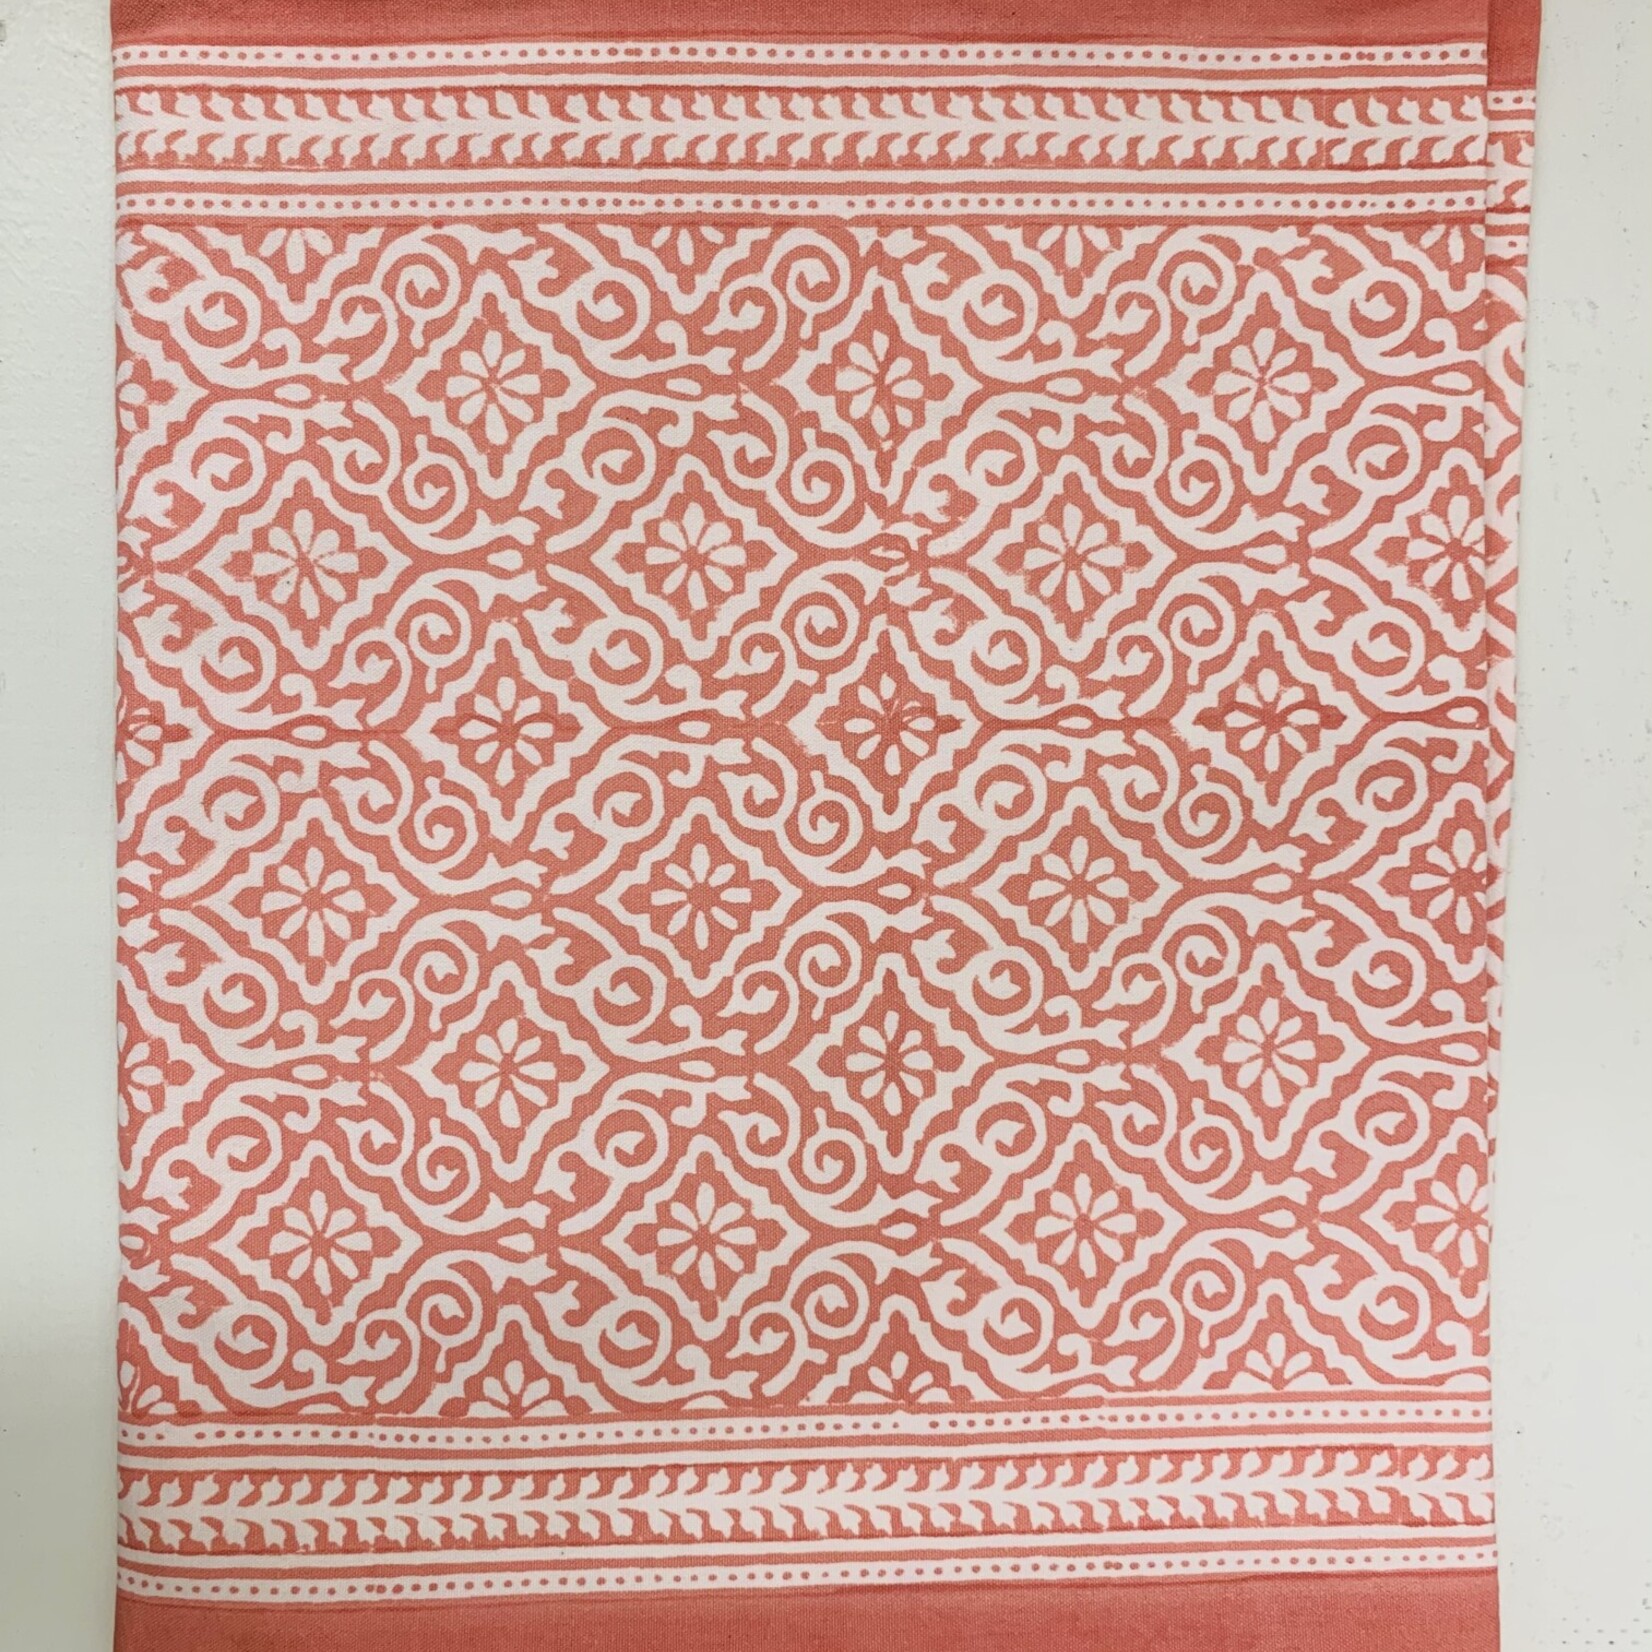 Living Imprints Jaipur Coral Table Runner 16"x90", India